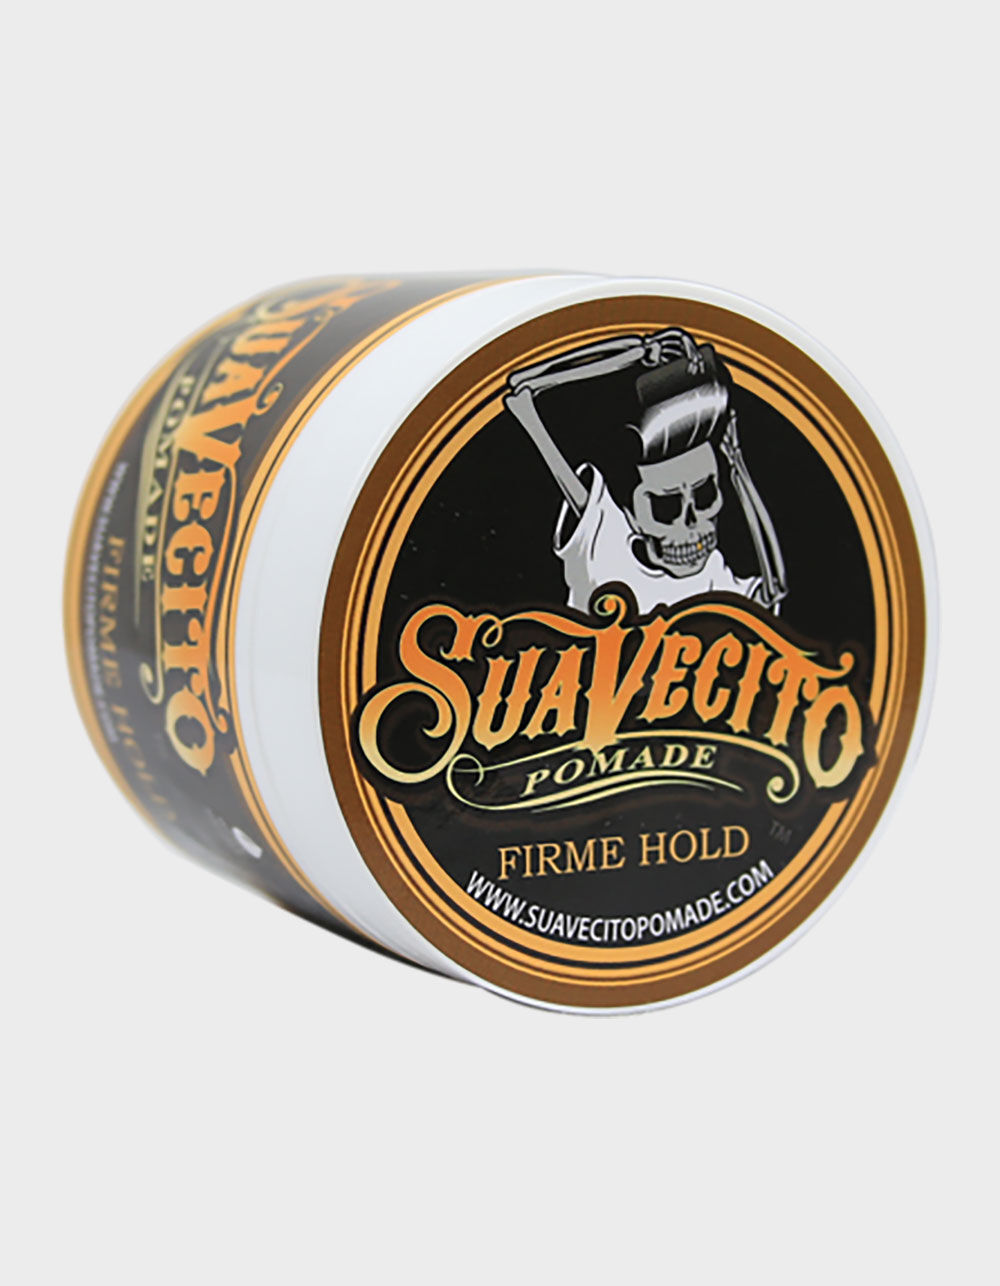 SUAVECITO Firme Hold Pomade (4 oz) image number 0